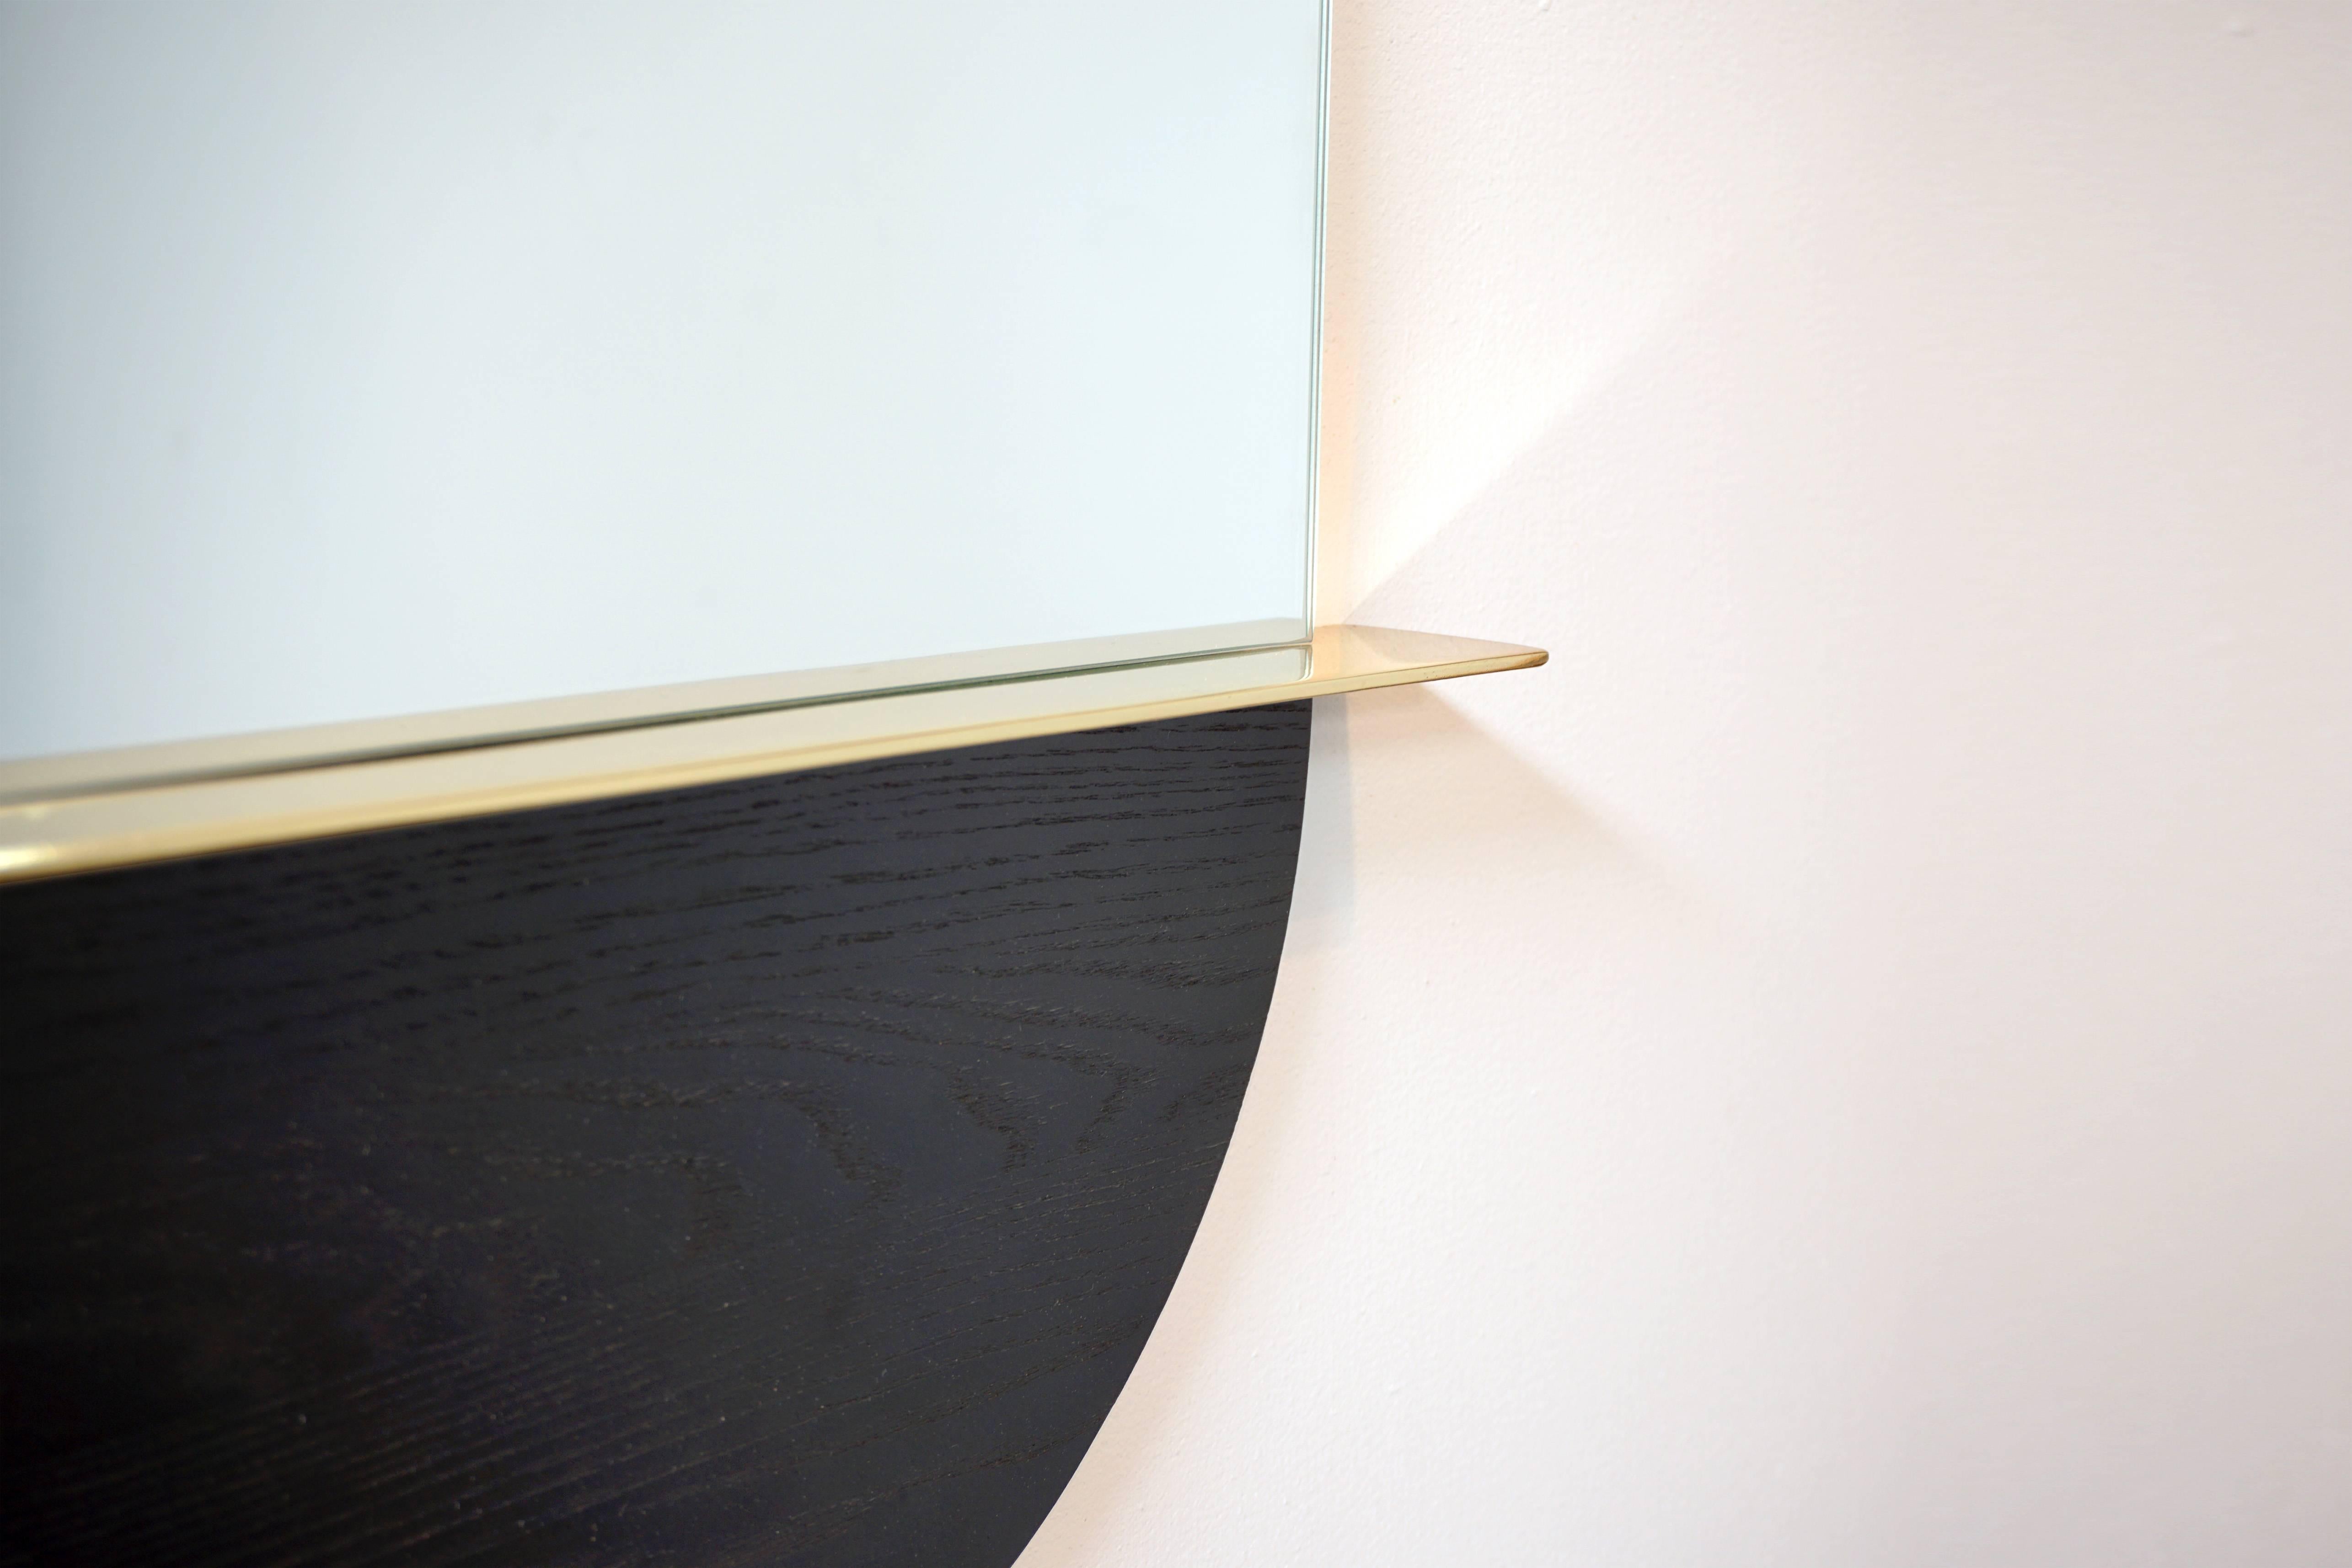 Part blackened ash, brass plated steel and part glass, the Solis Mirror references the horizon, the rising sun, and your reflection among it all. A brass circle stands an inch behind the oblong mirror as if hovering behind. The mirror's glass ends